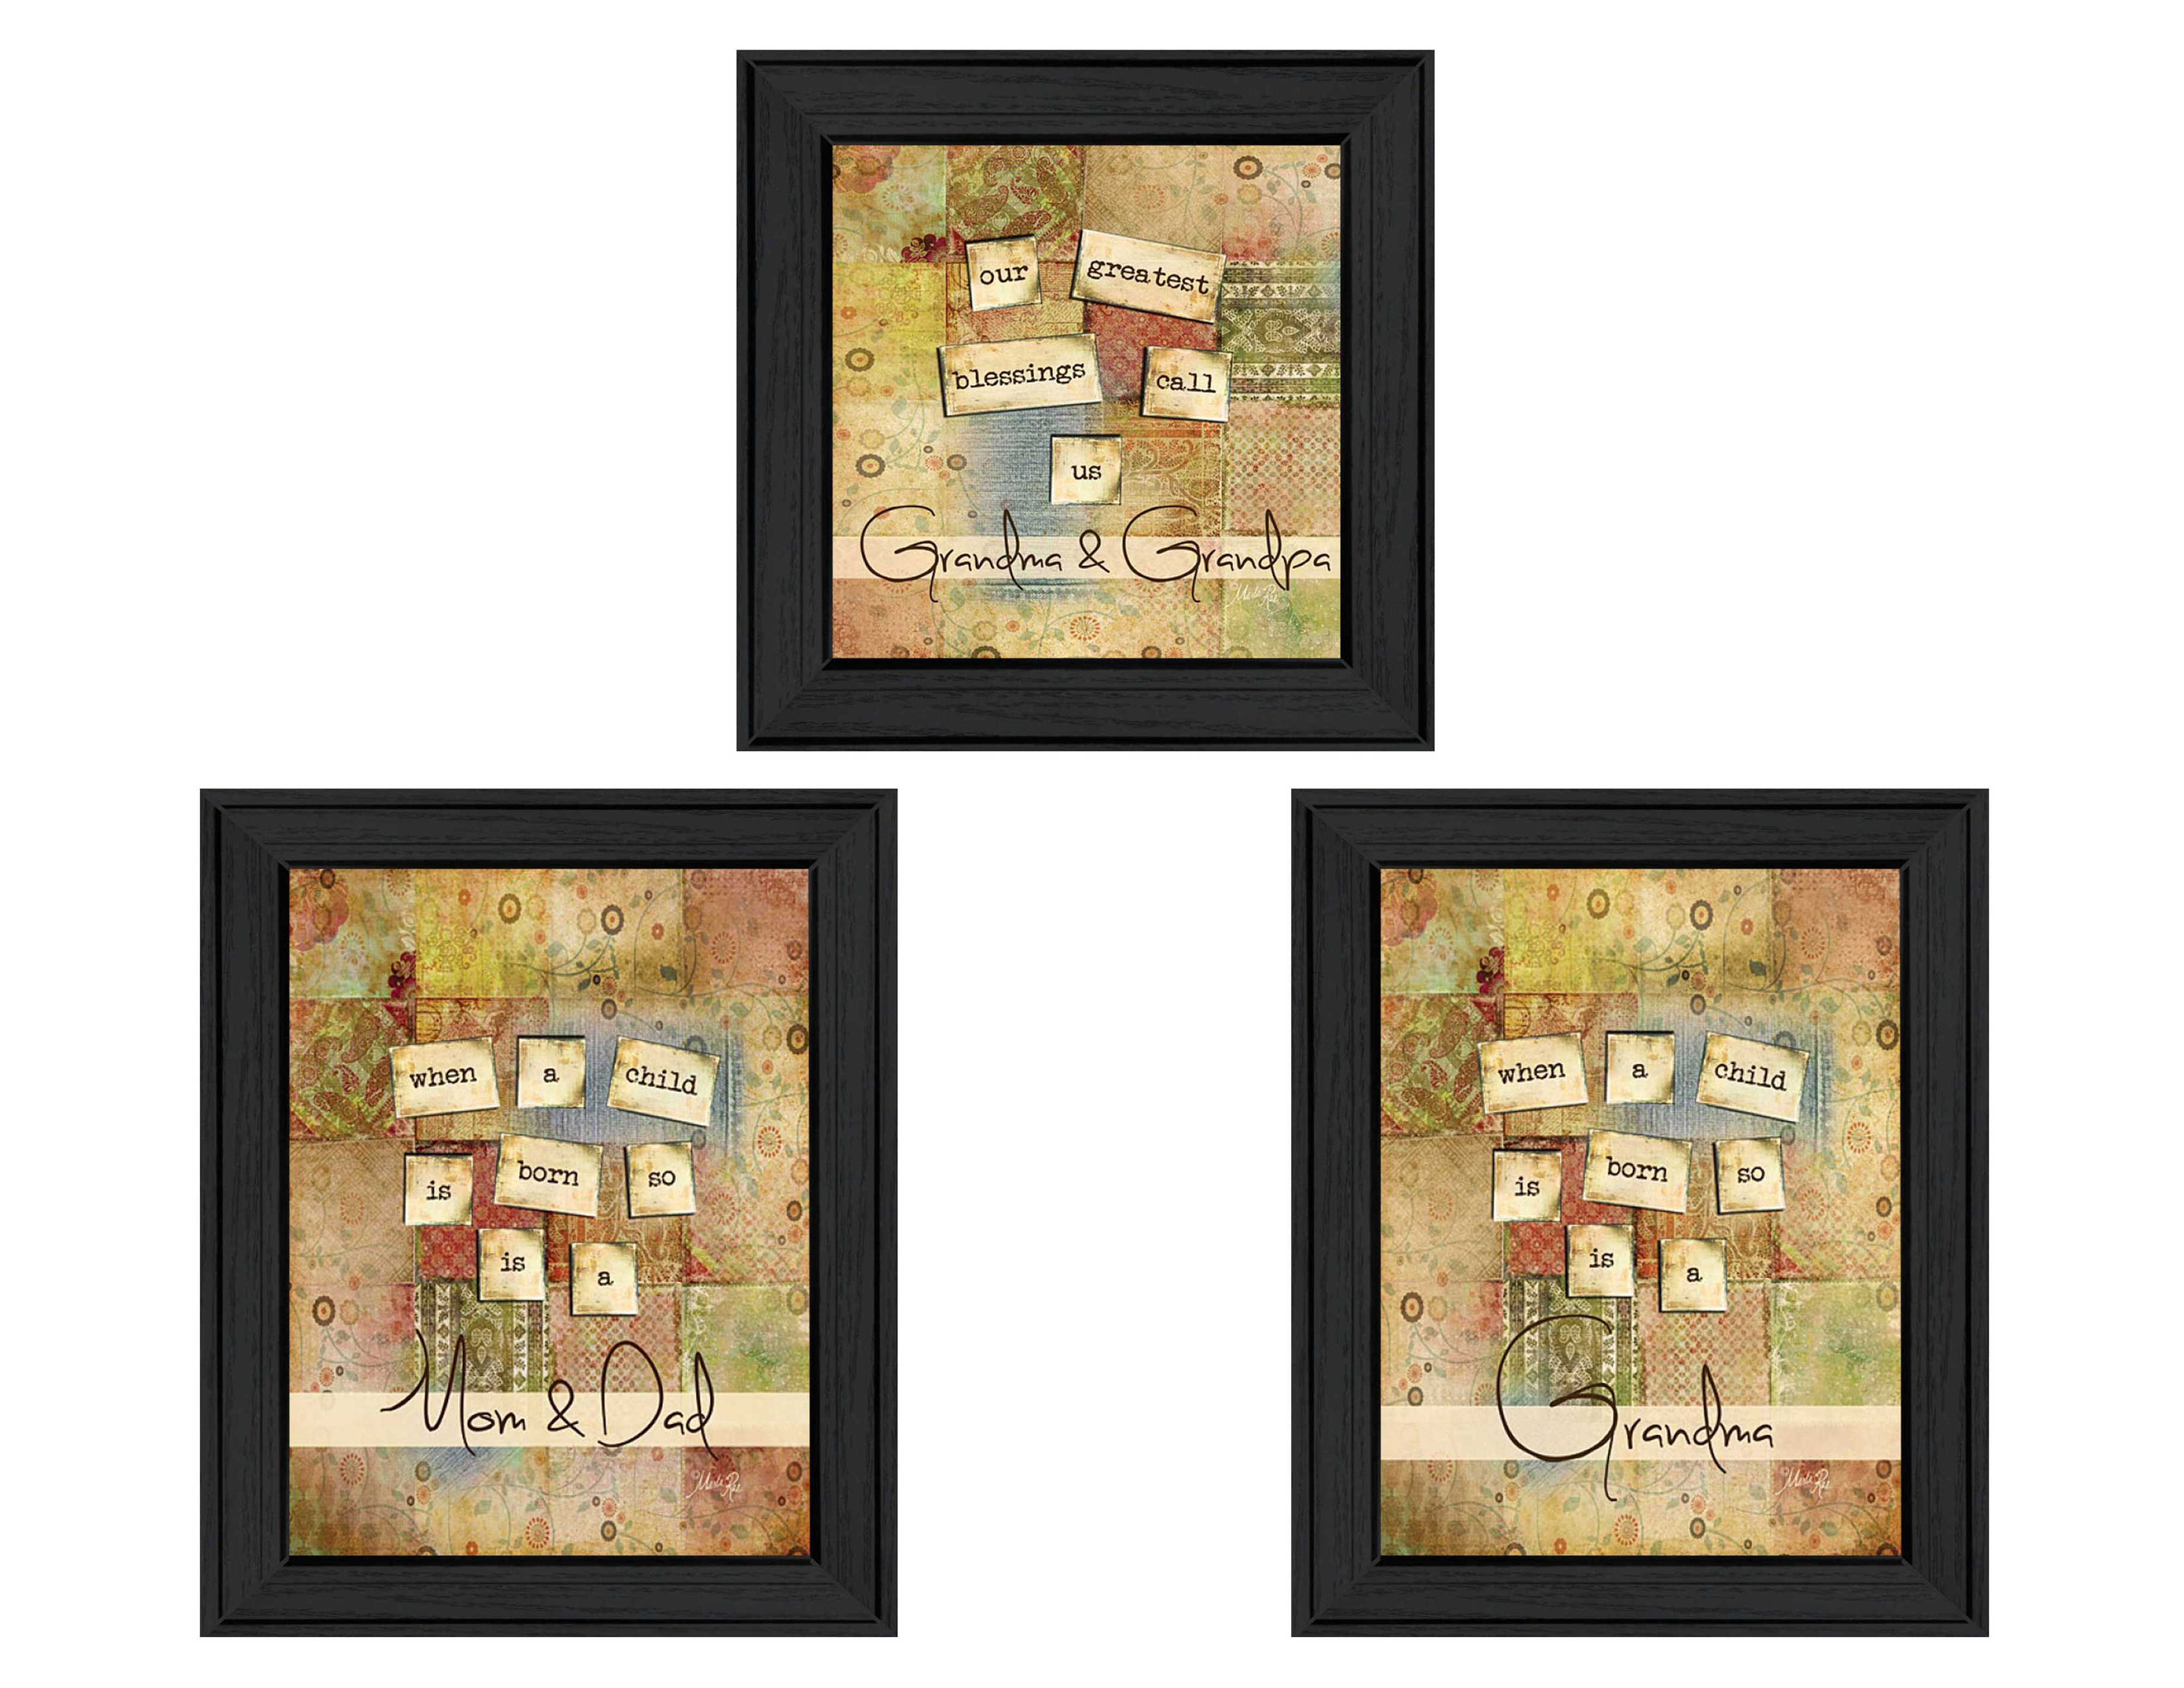 "Child" Collection By Marla Rae, Printed Wall Art, Ready To Hang Framed Poster, Black Frame